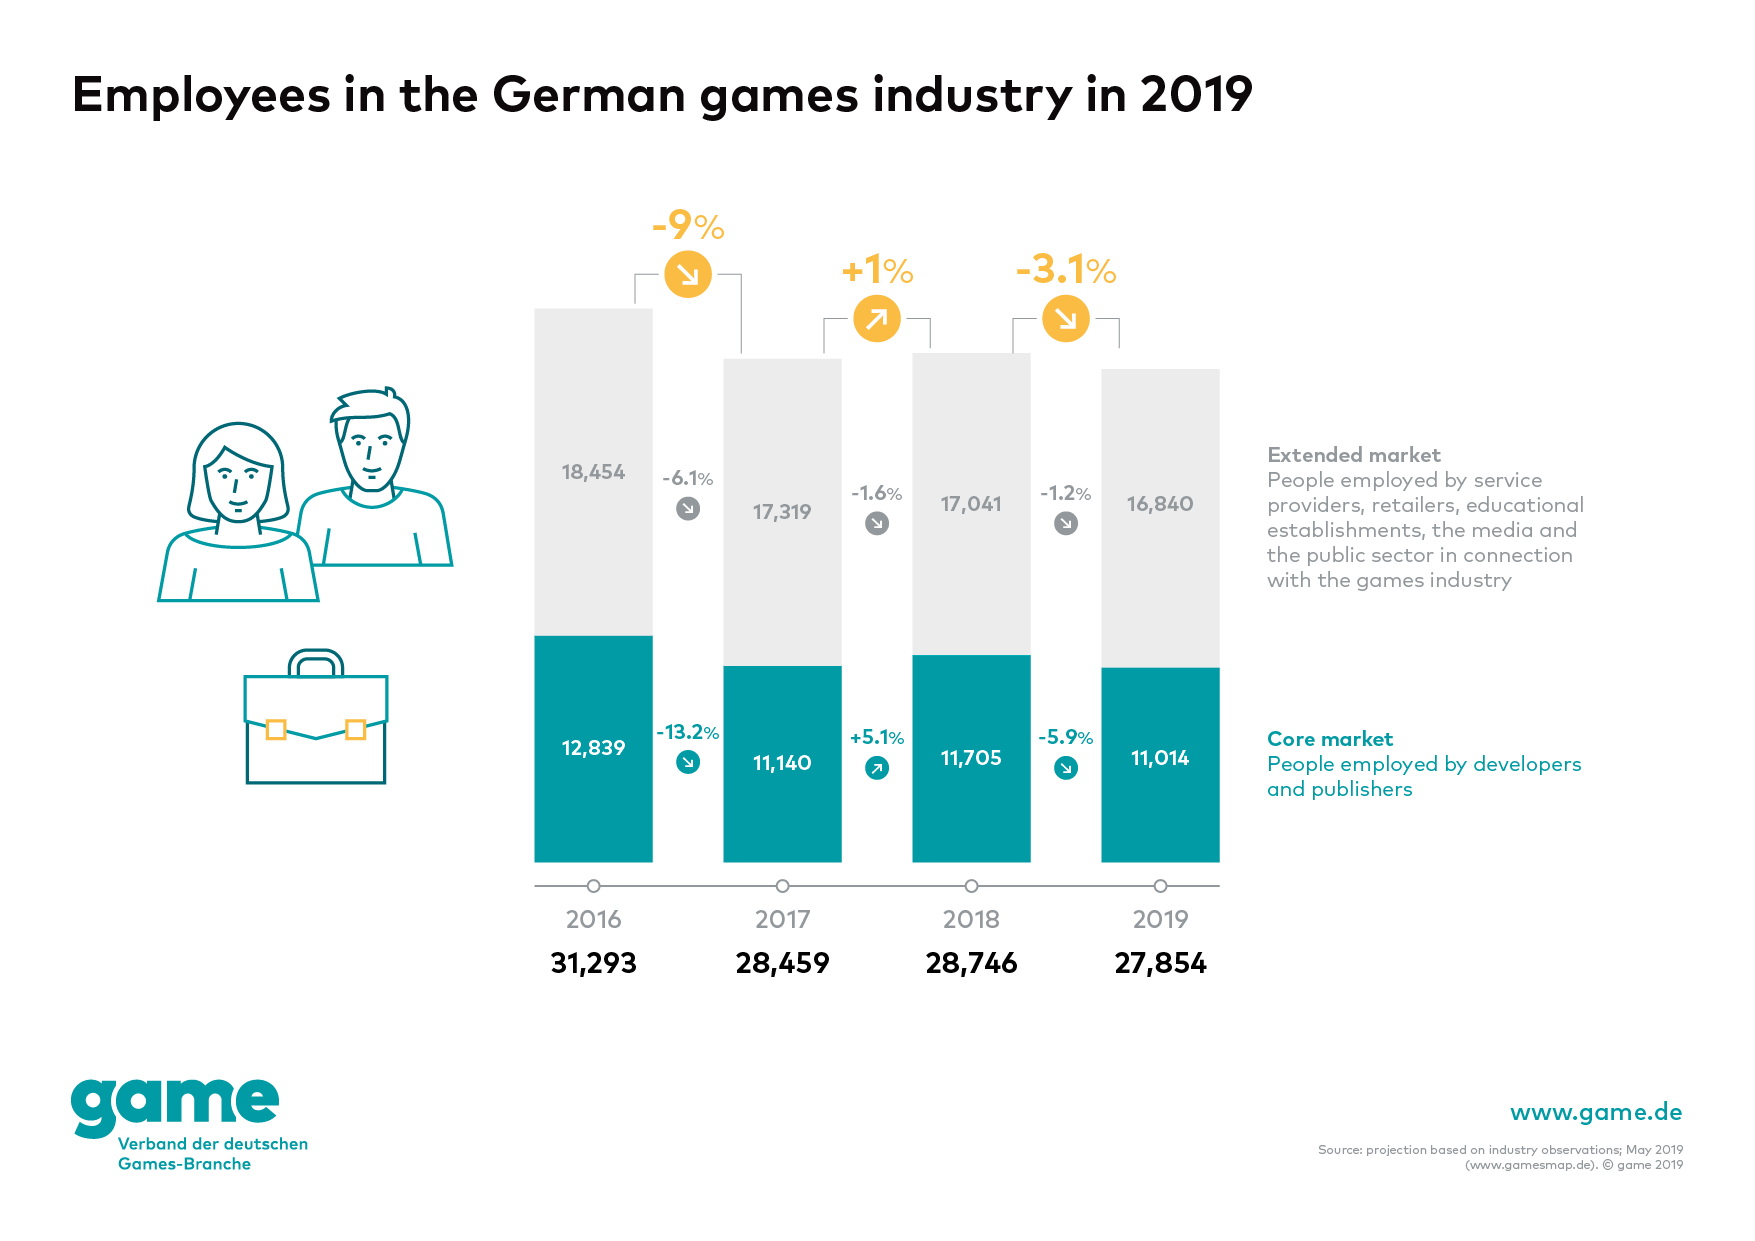 Employees in the German games industry in 2019